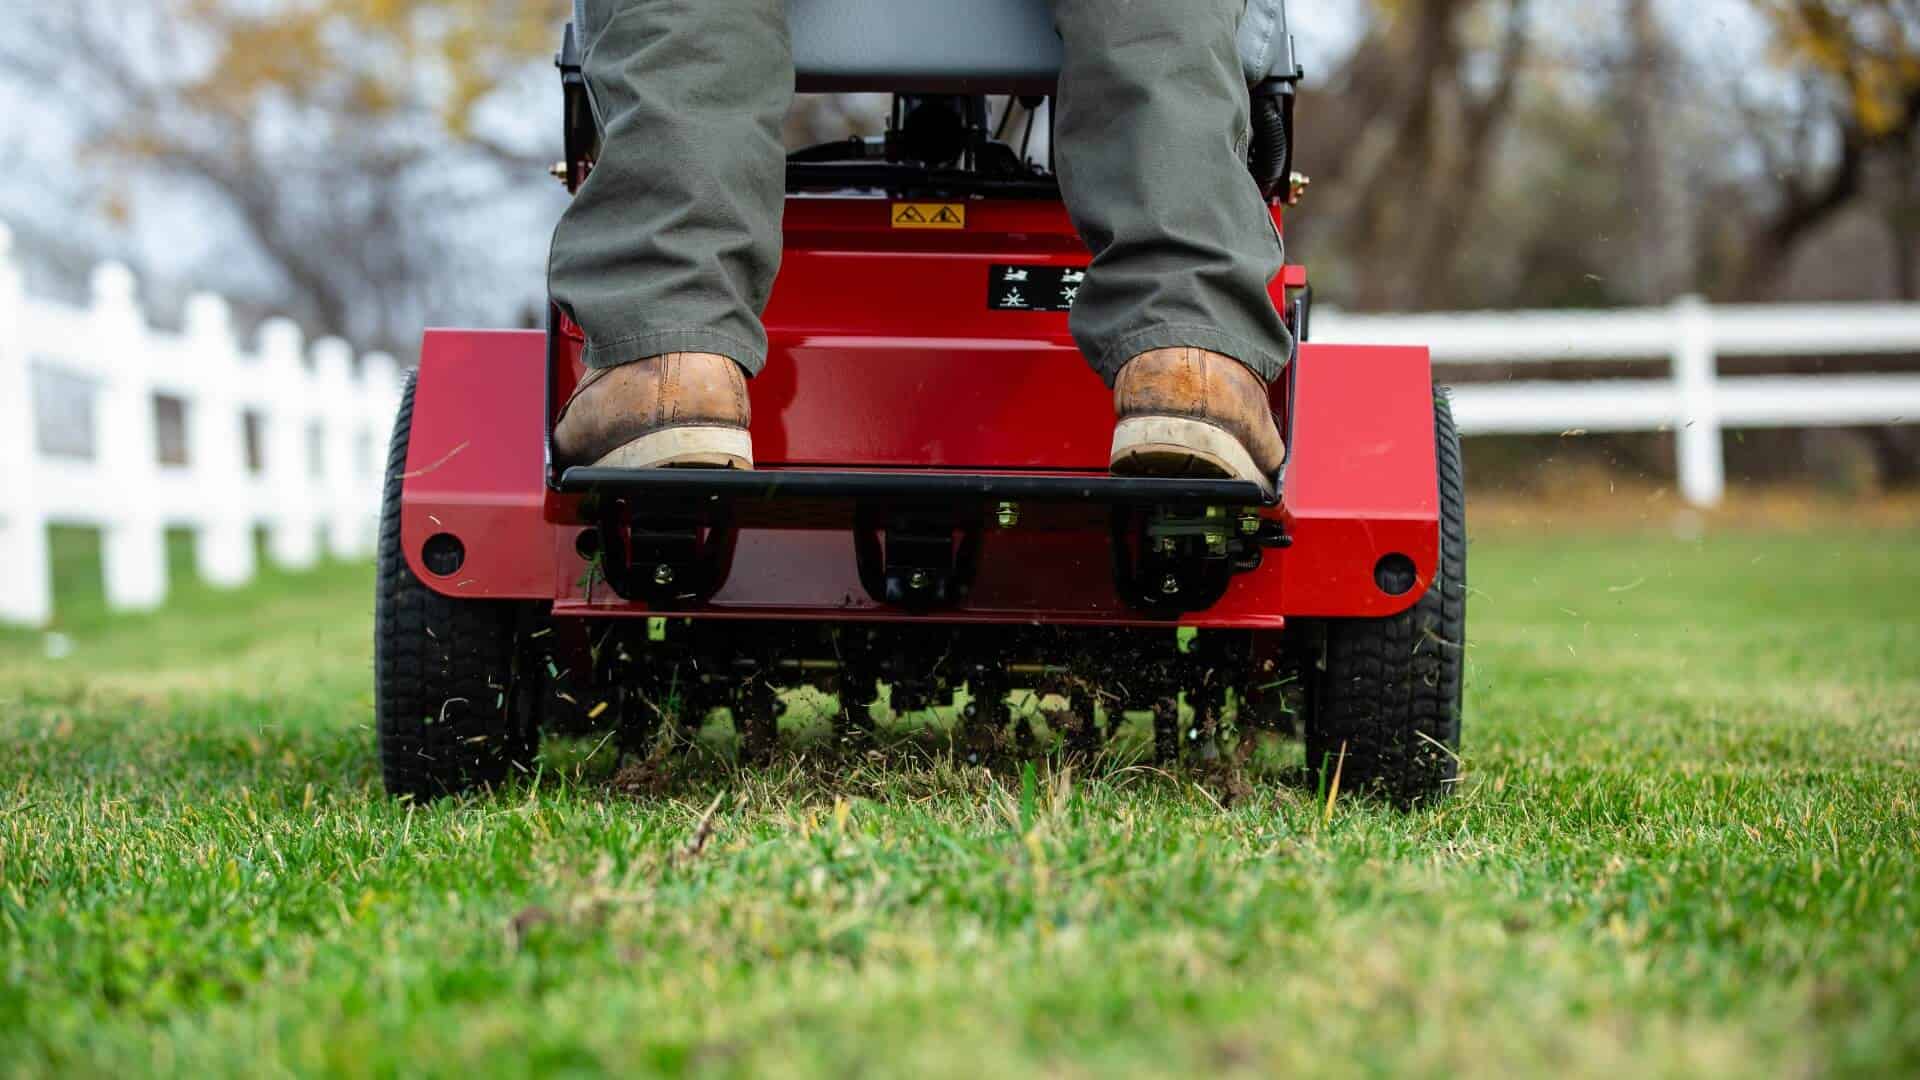 Lawn aeration using an Exmark stand-on aerator